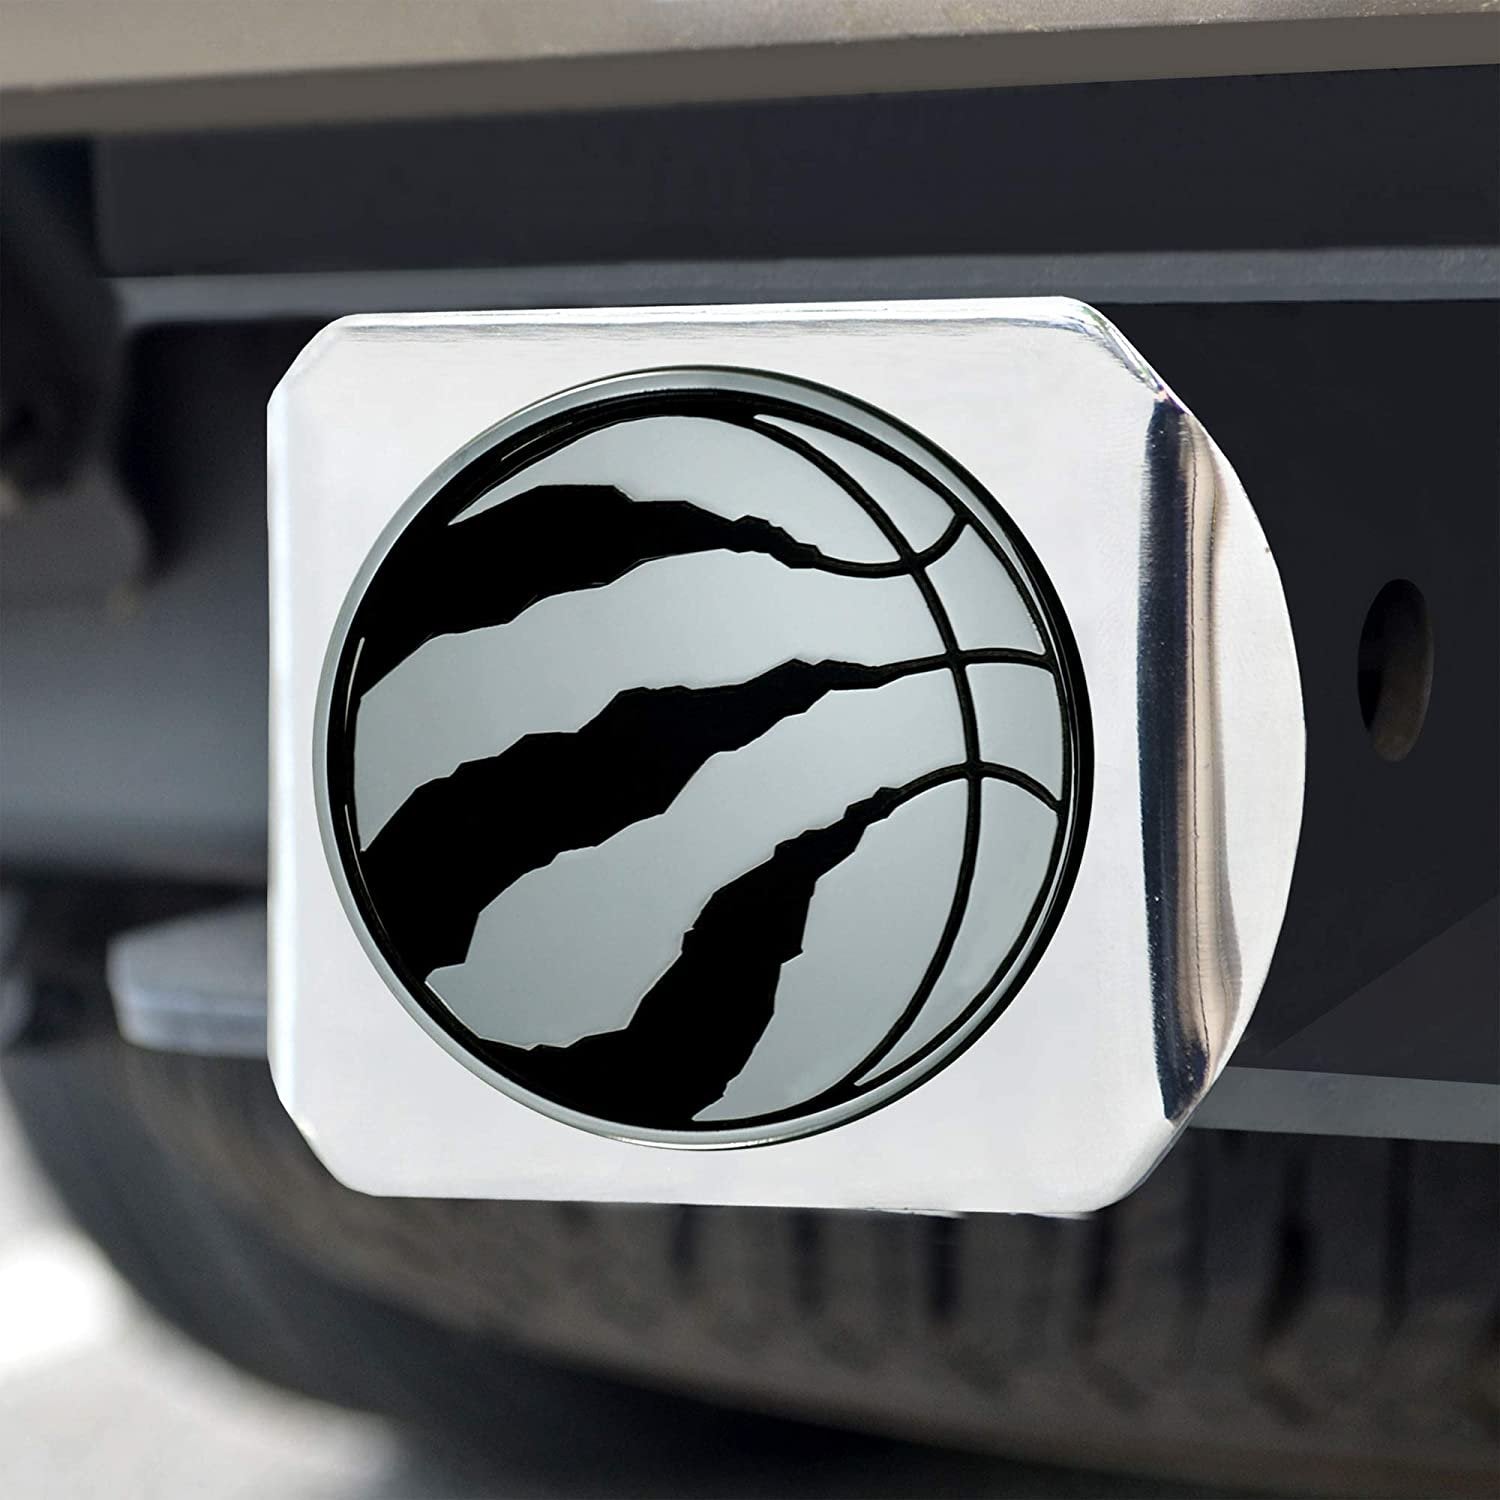 Toronto Raptors Hitch Cover Solid Metal with Raised Chrome Metal Emblem 2" Square Type III